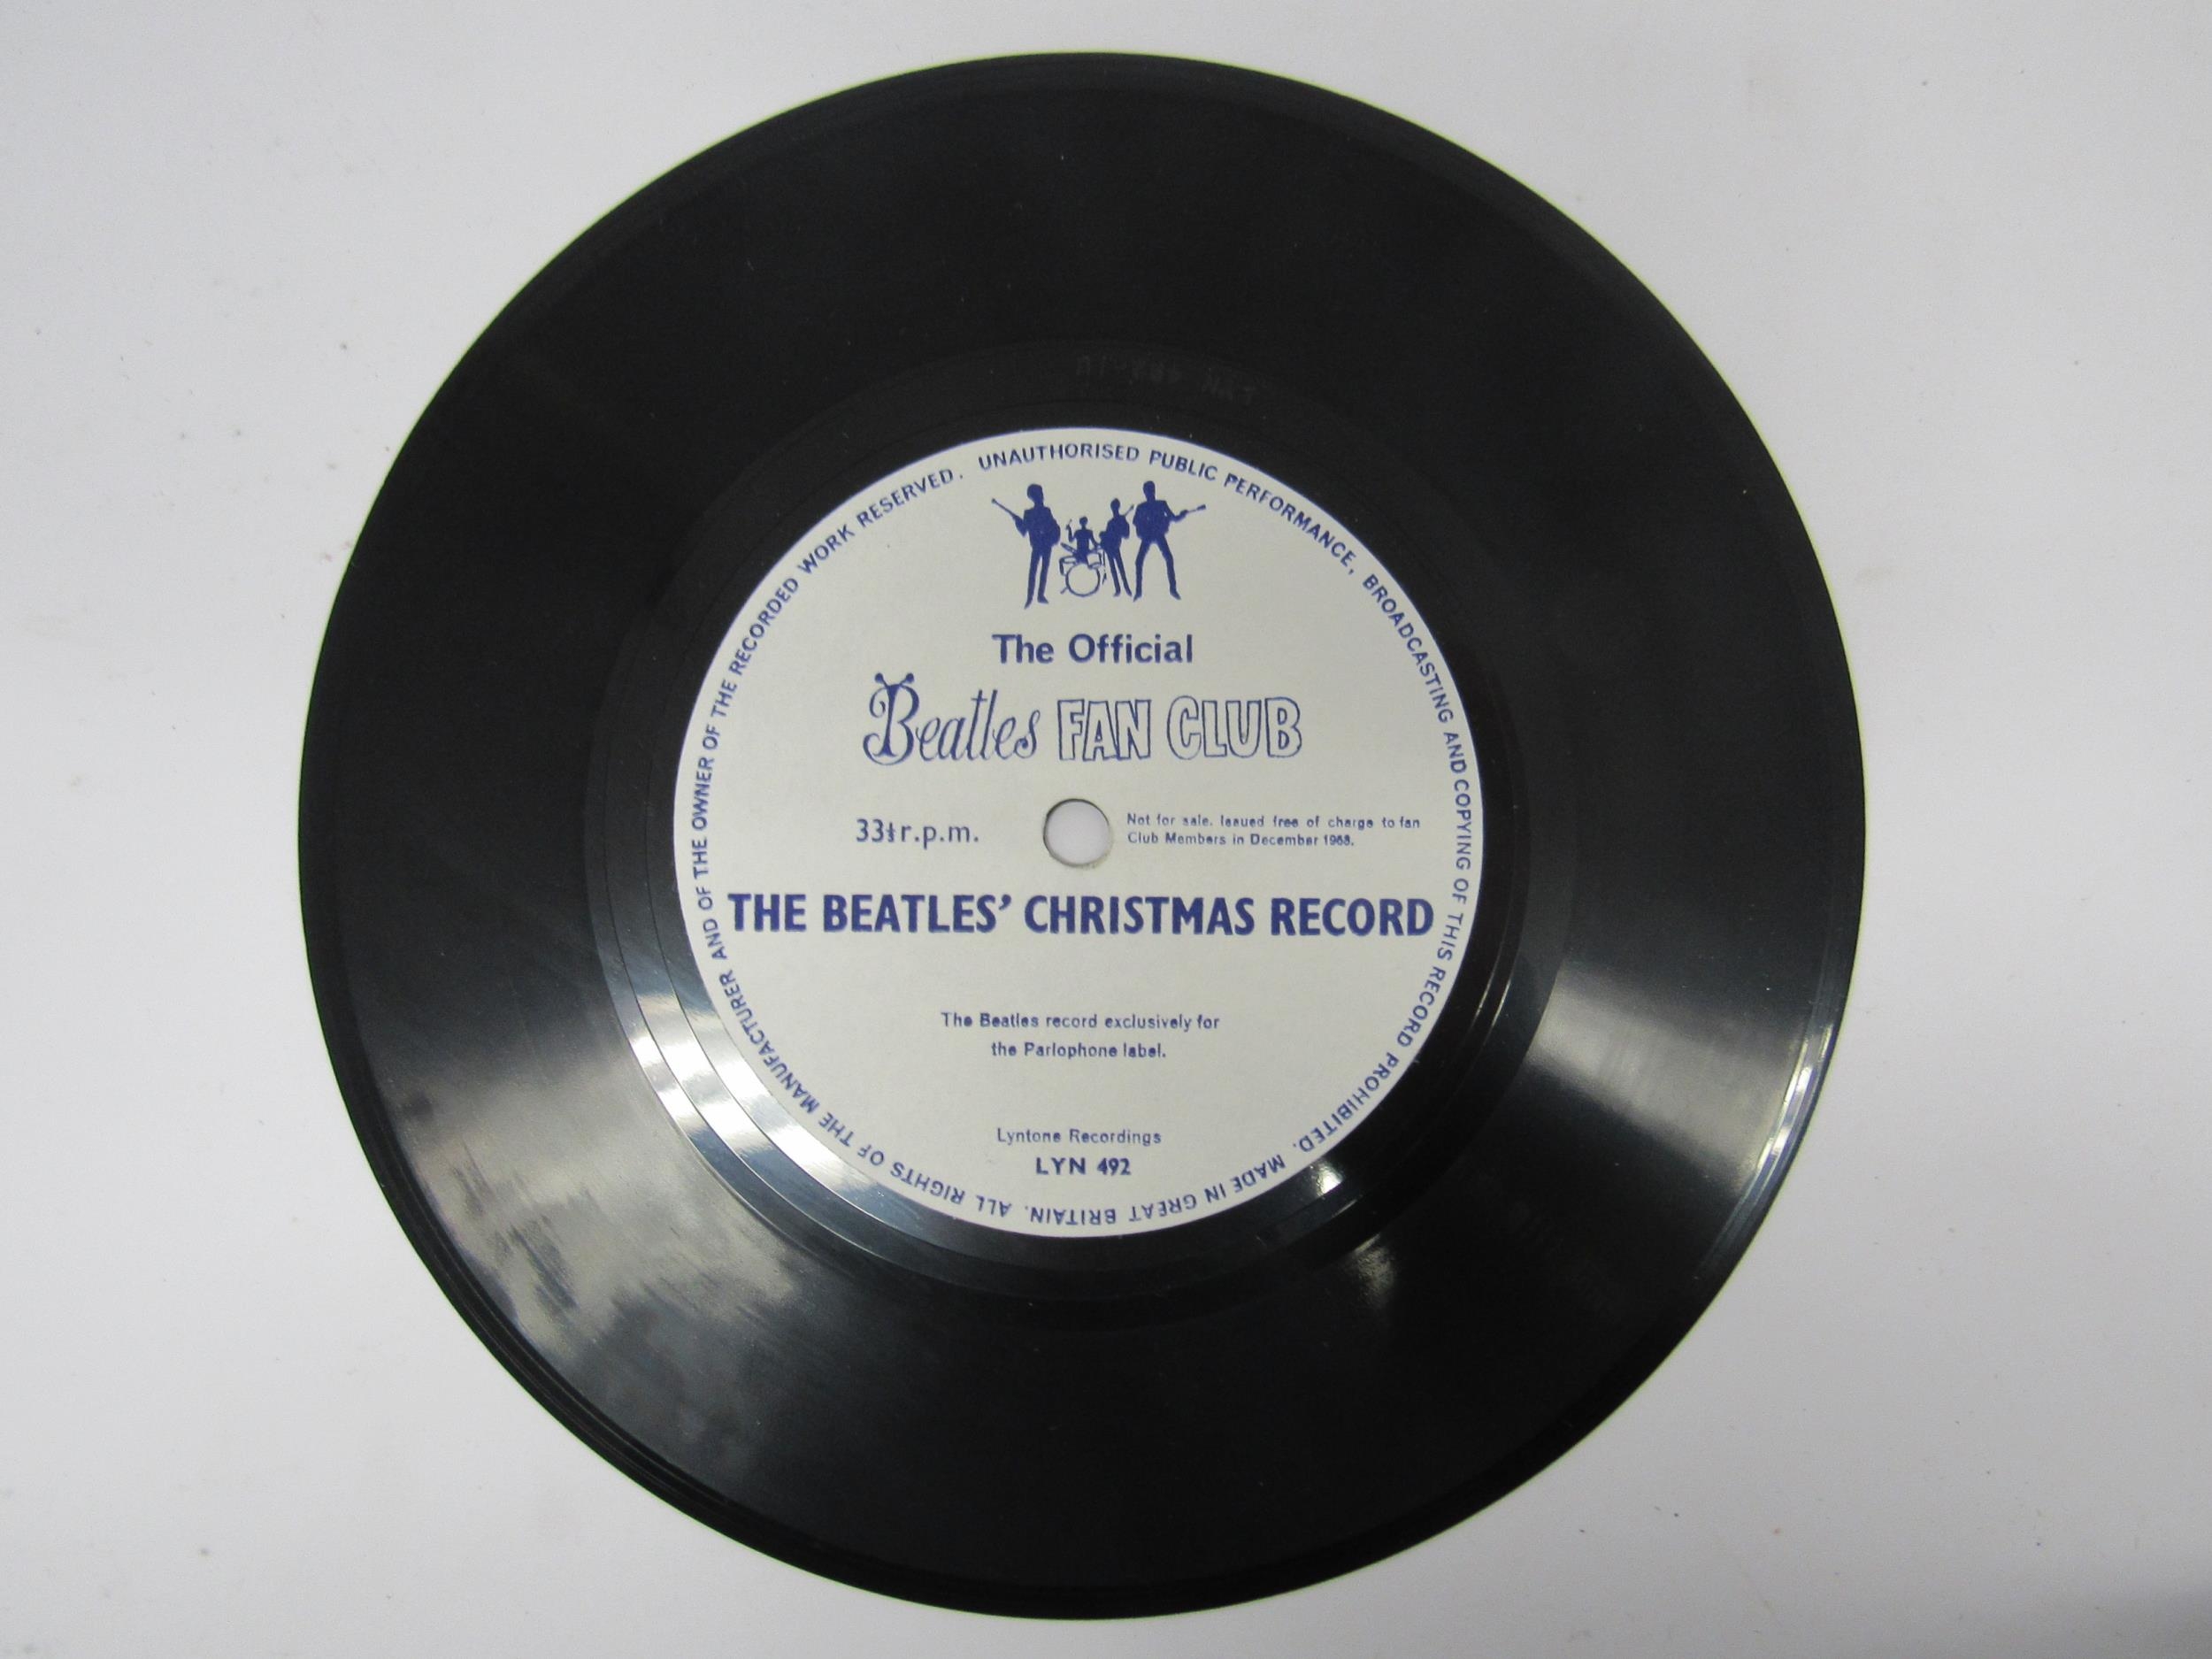 THE BEATLES: Two Beatles Official Fan Club Christmas 7" flexi-discs to include 'The Beatles - Image 4 of 10